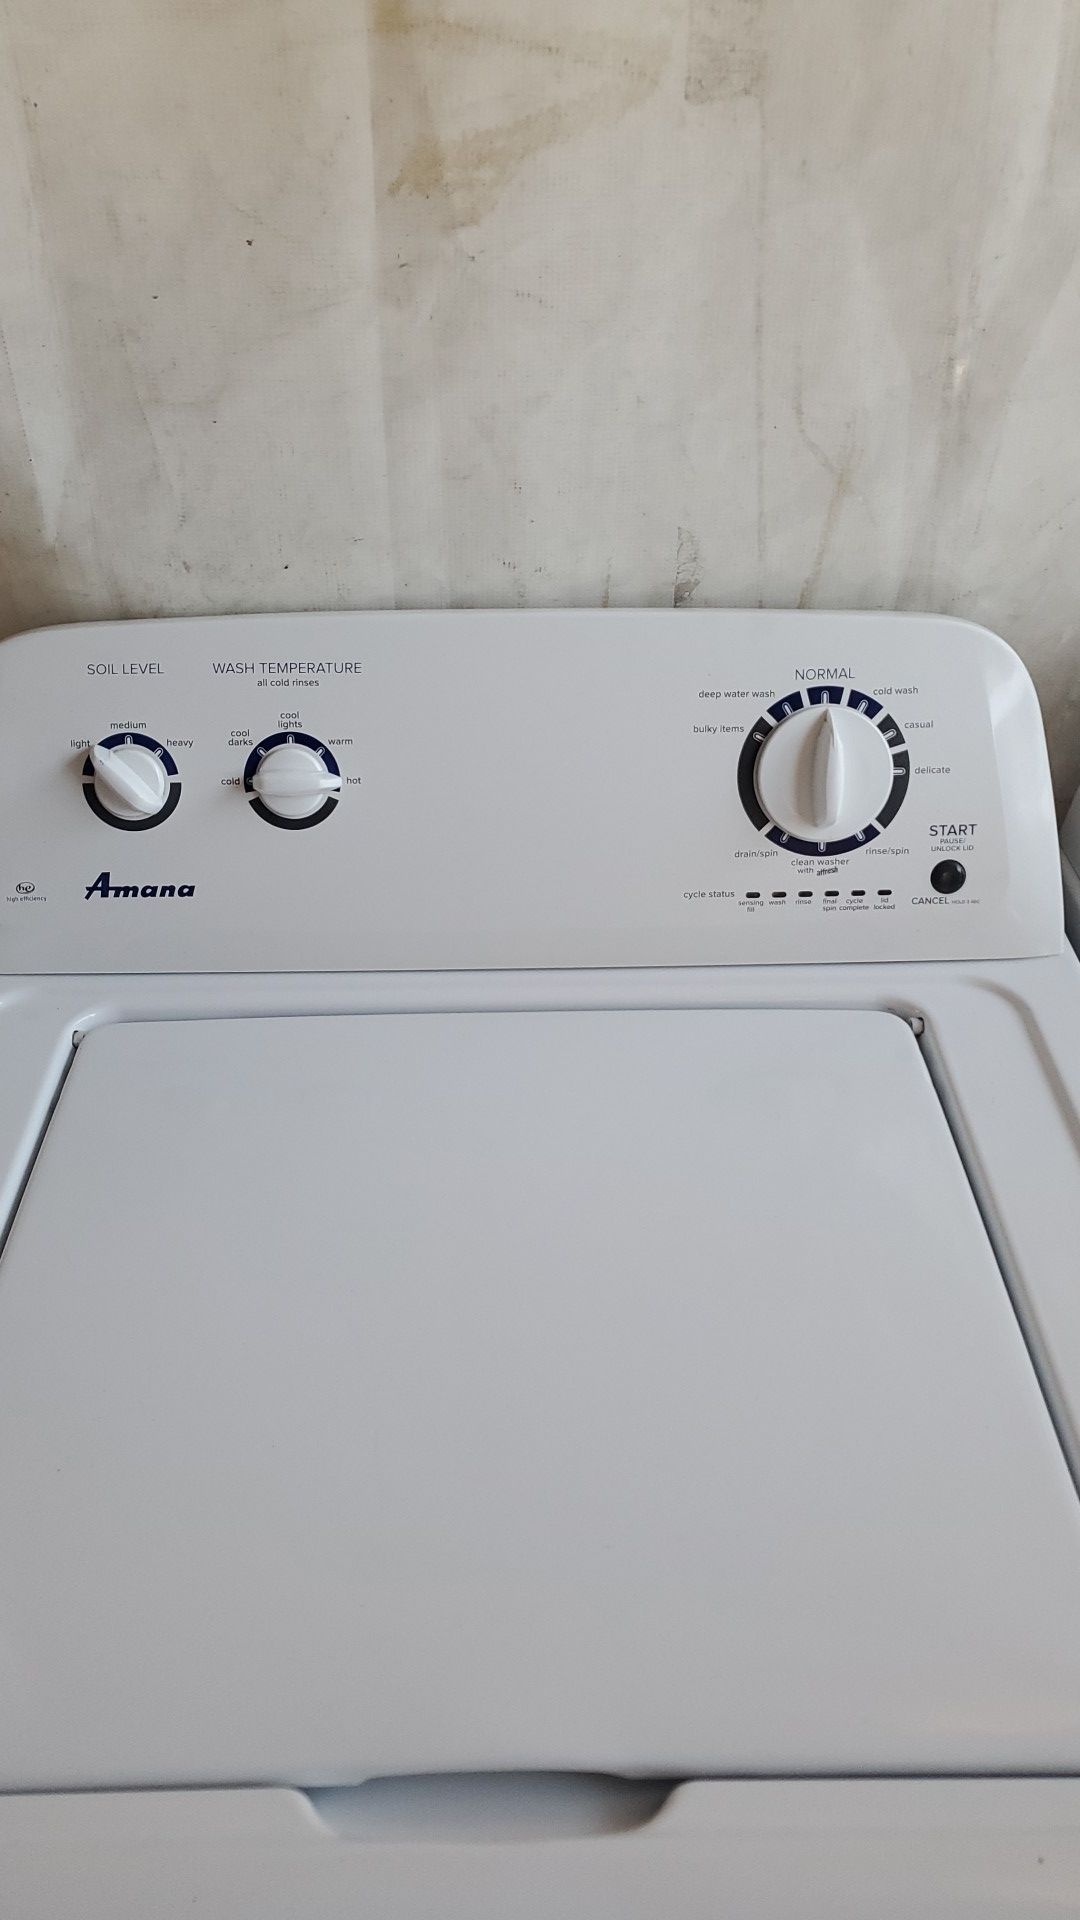 Amana washer and drier heavy duty good condition